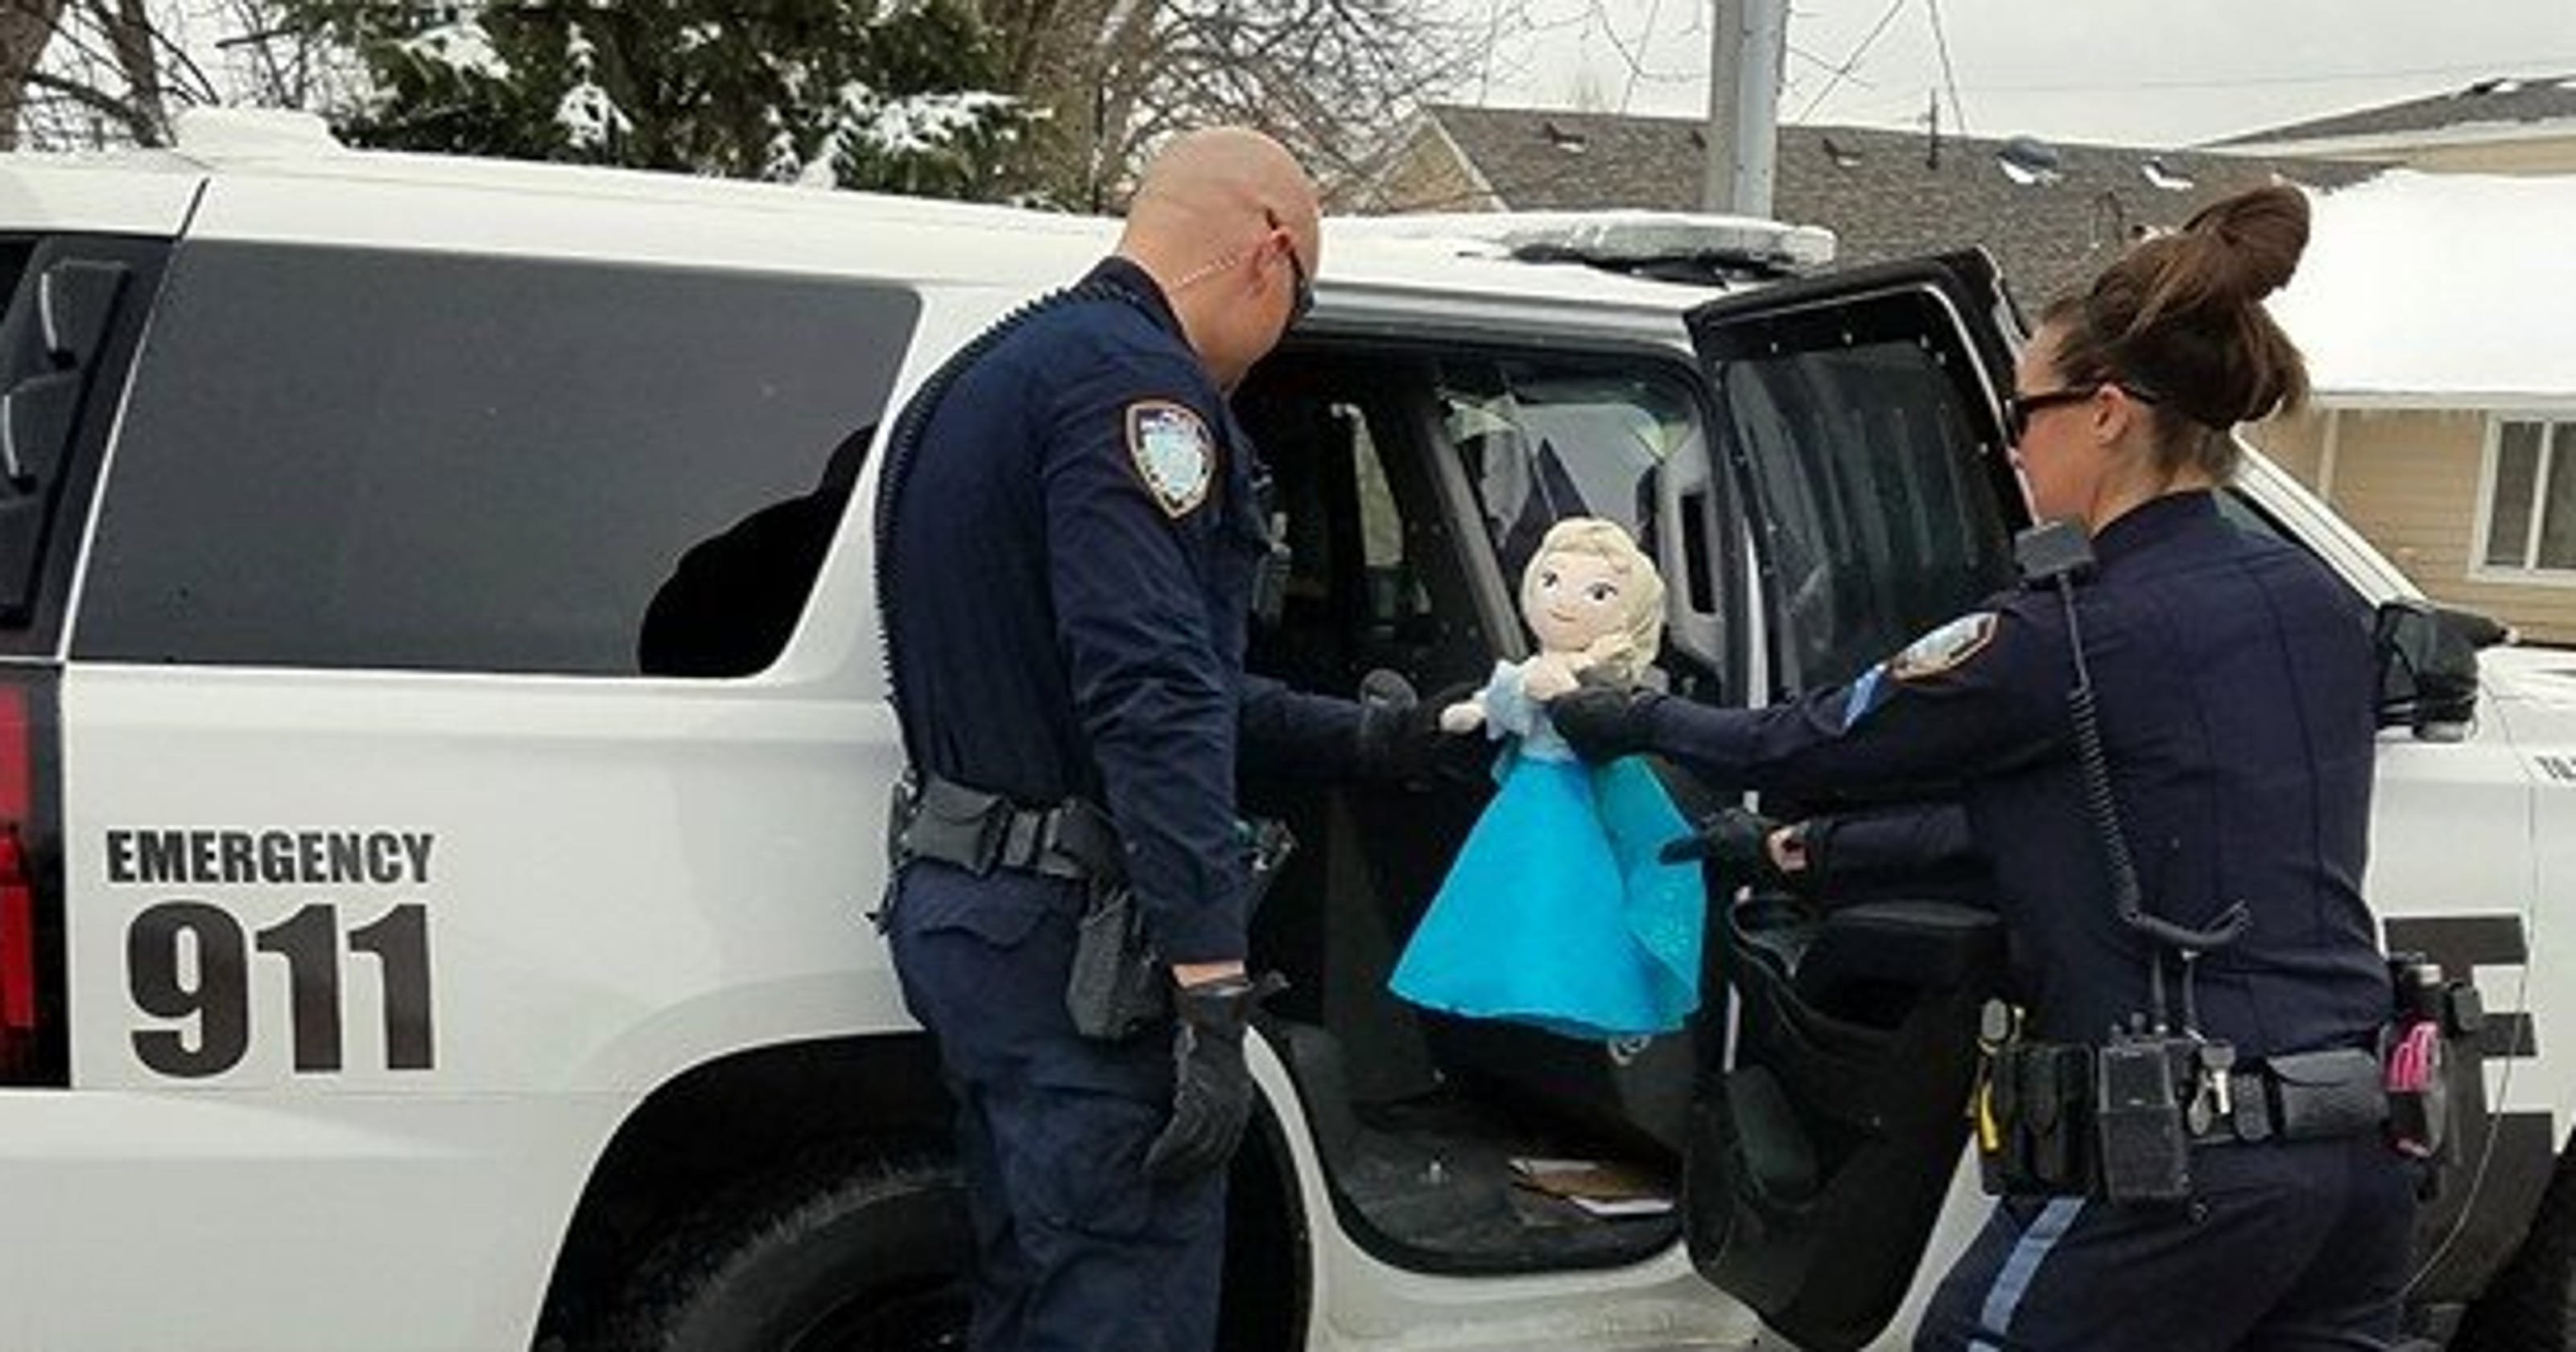 Iowa Police Officers Catch Suspect Queen Elsa From Frozen For Bringing Cold Snow To State